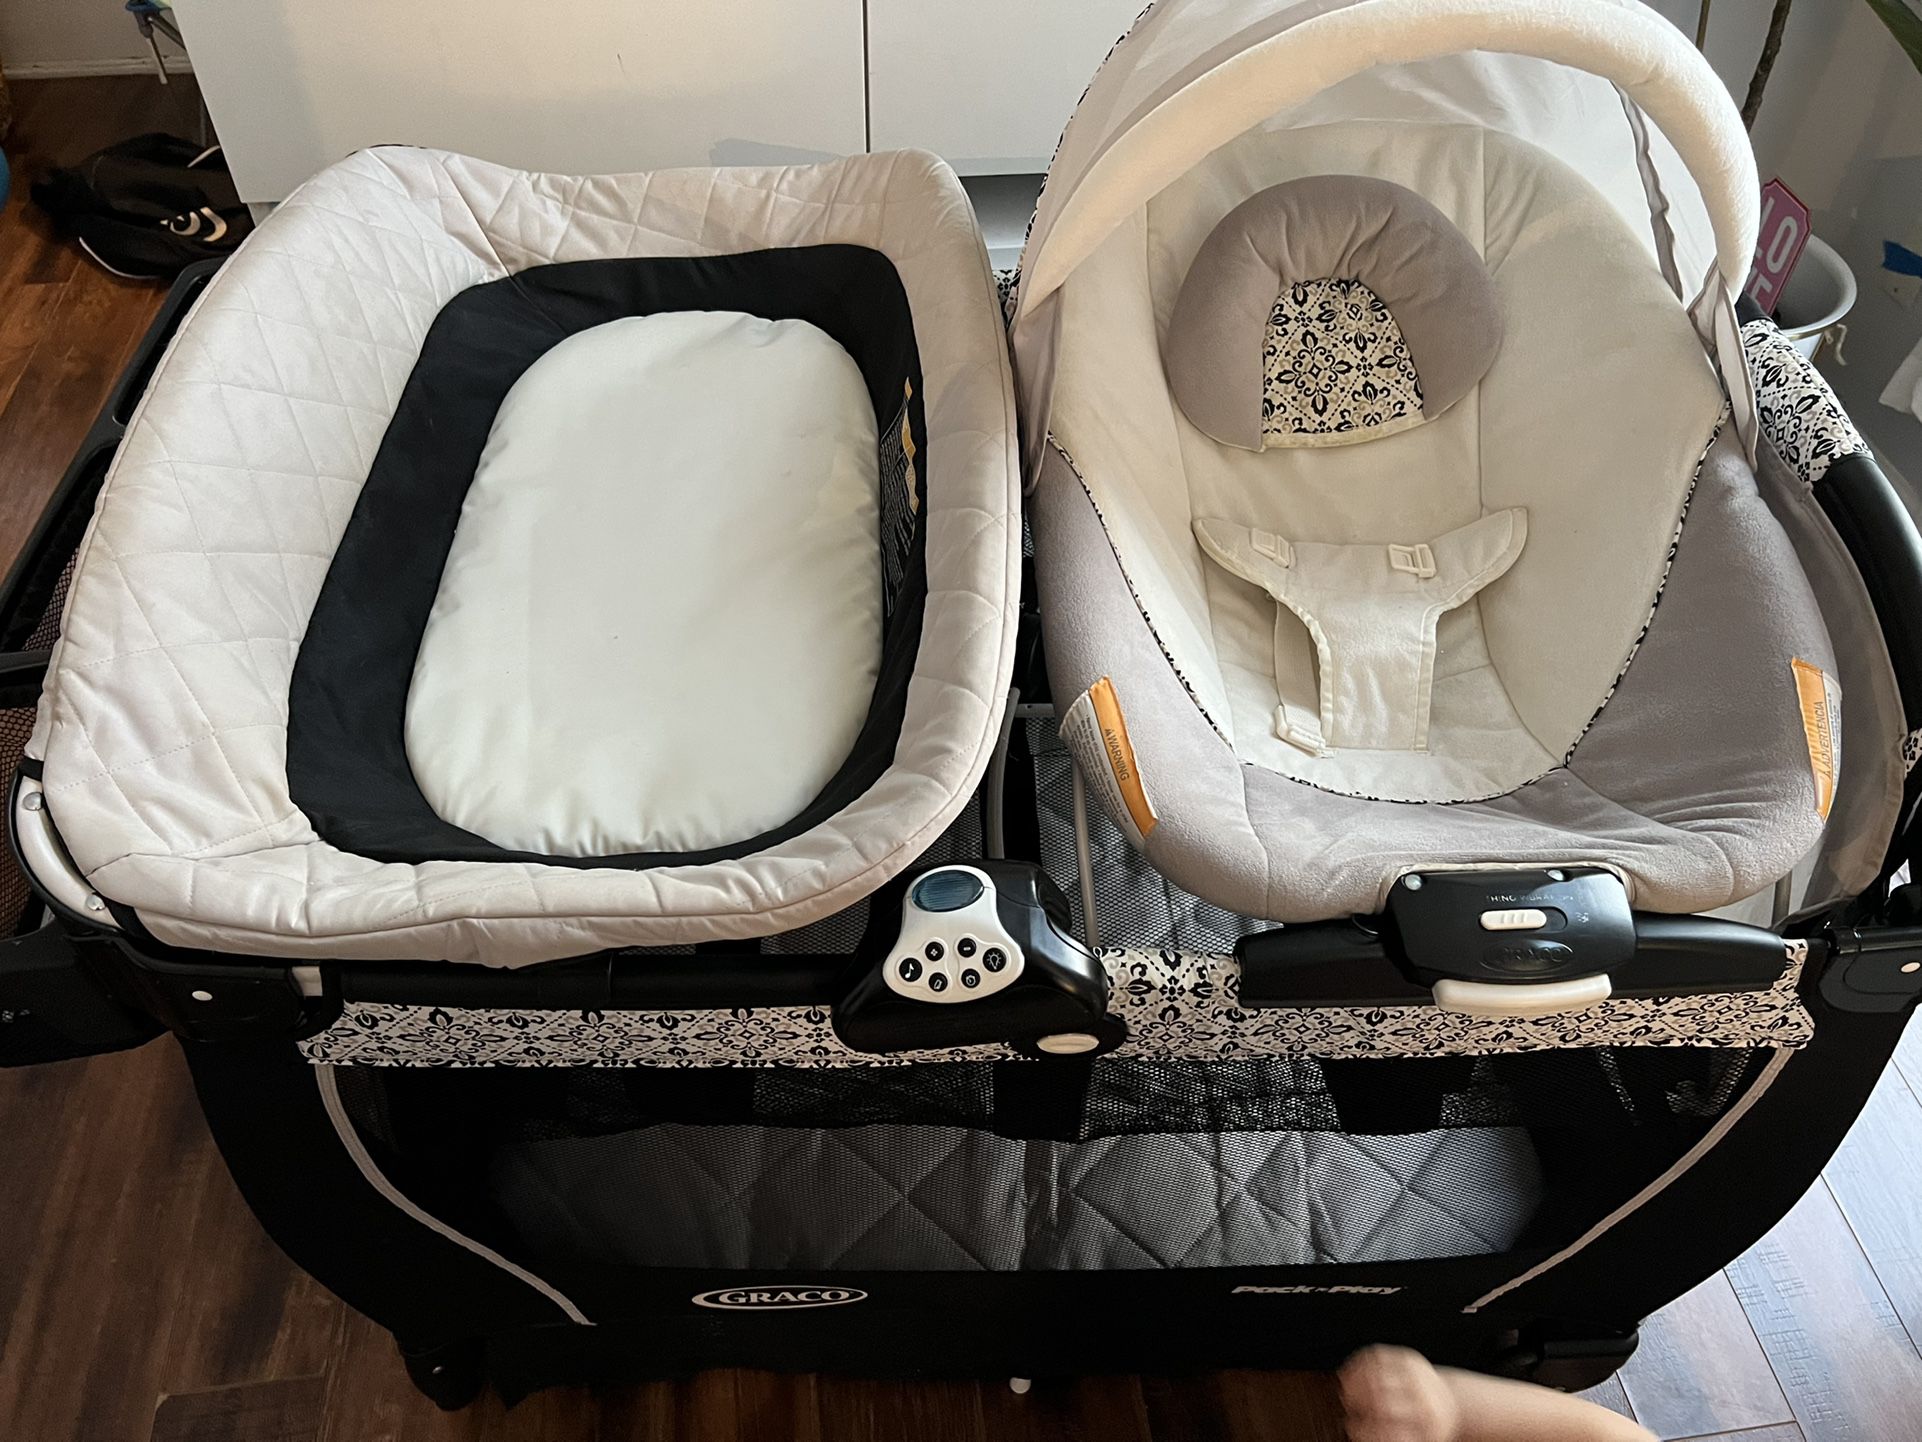 Pack and play with diaper change her bassinet sound machine to separate levels and diaper storage